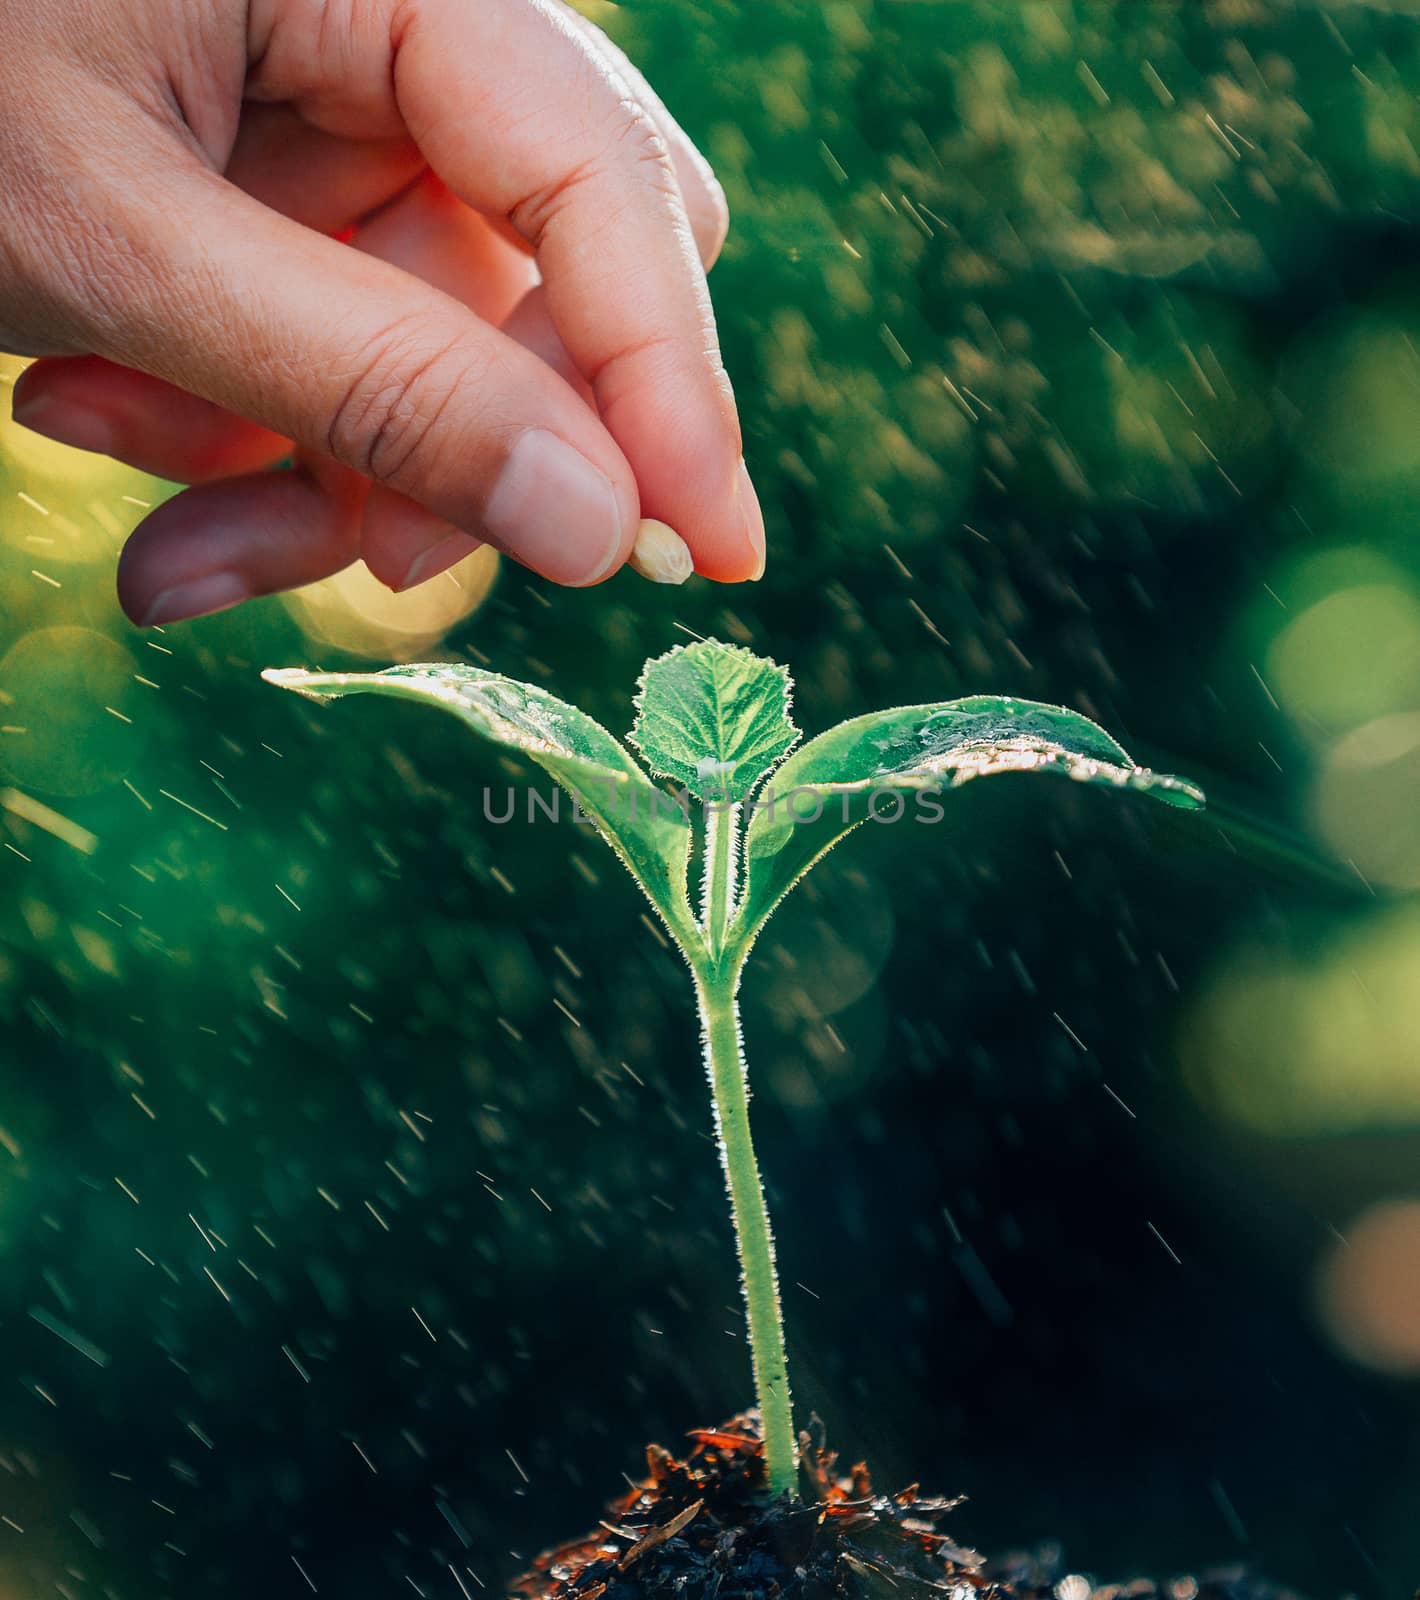  hand planting a seed in soil by sommai